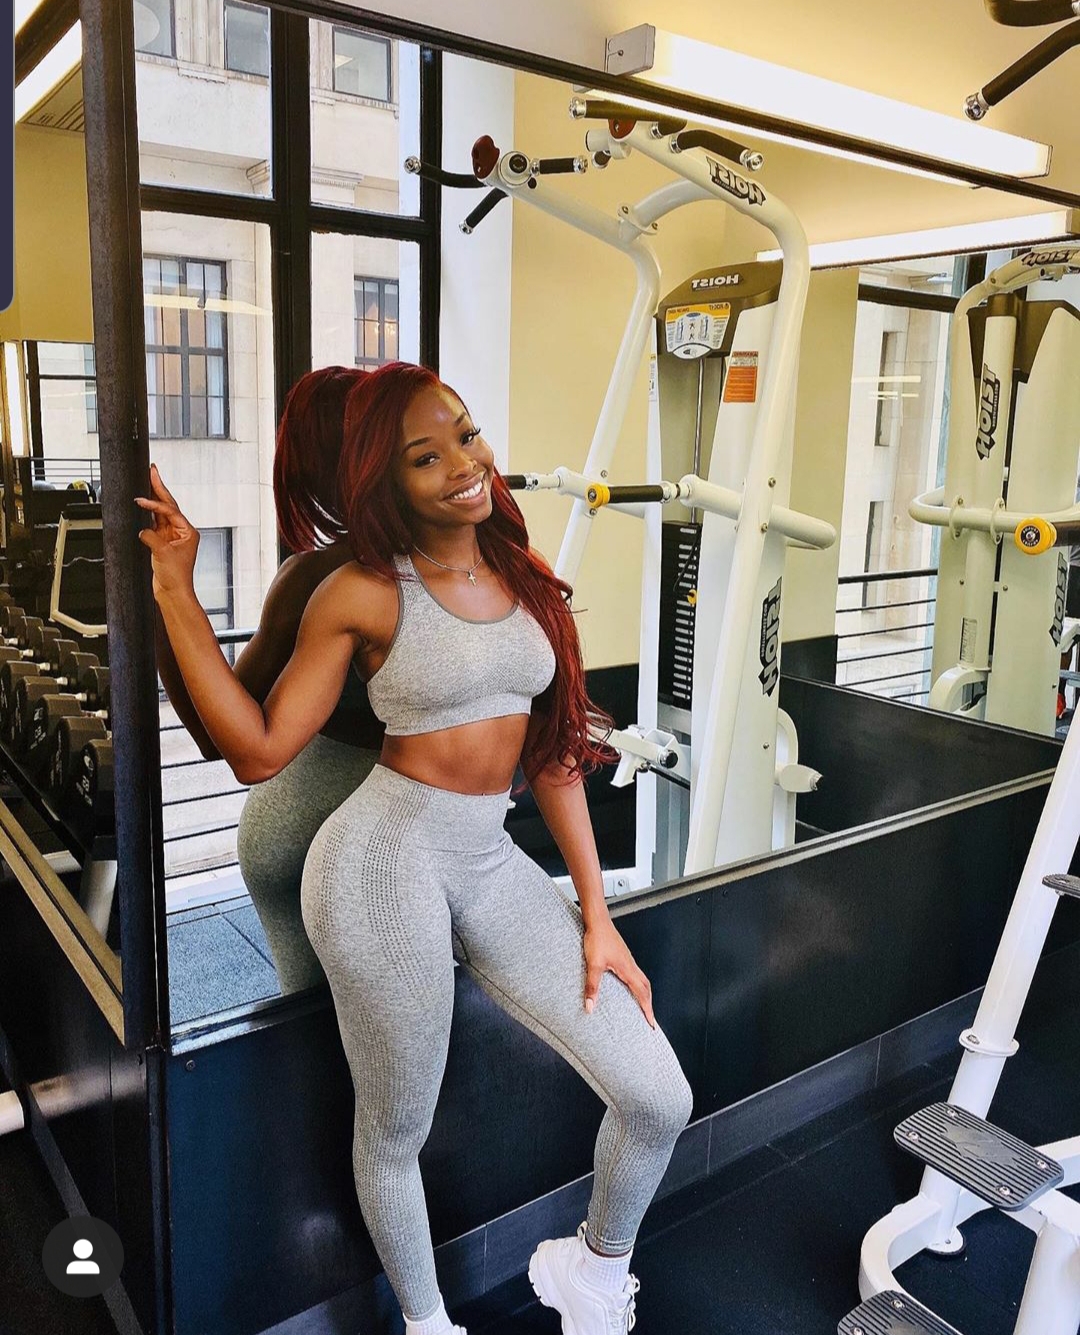 12 Fitness Influencers to Get You Over Your 2020 Fitness Goals - RESPECT.